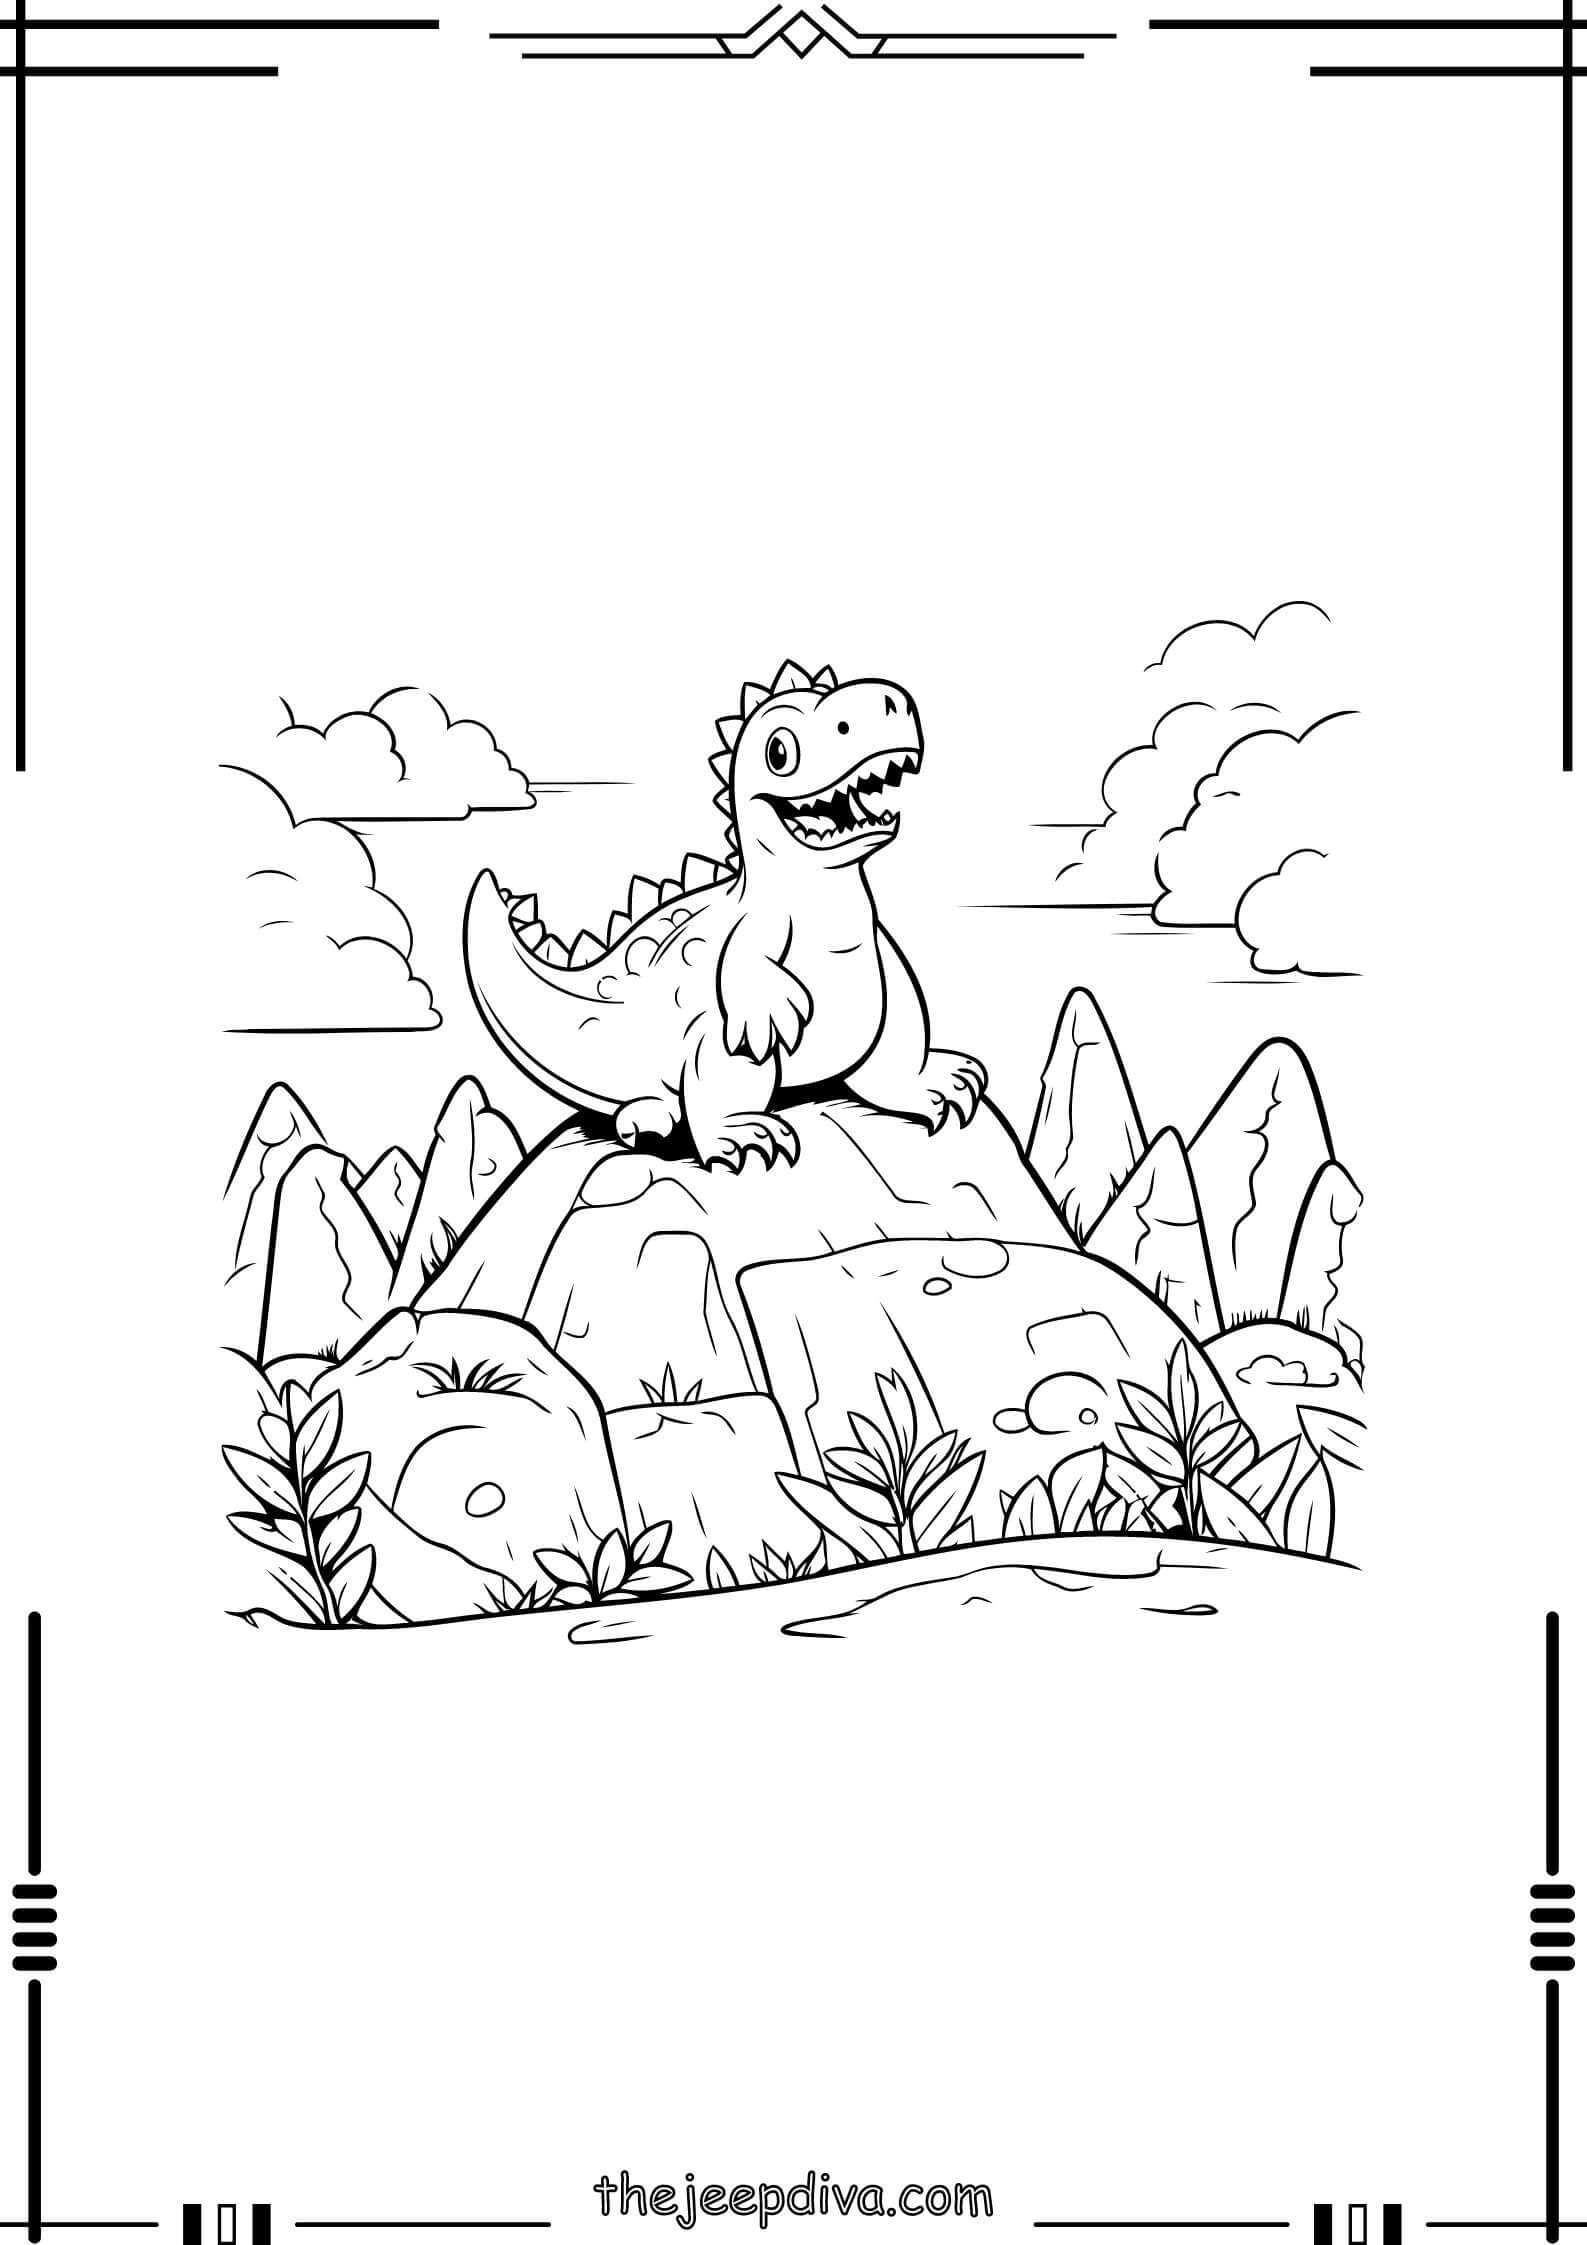 Dinosaur-Colouring-Pages-Easy-23